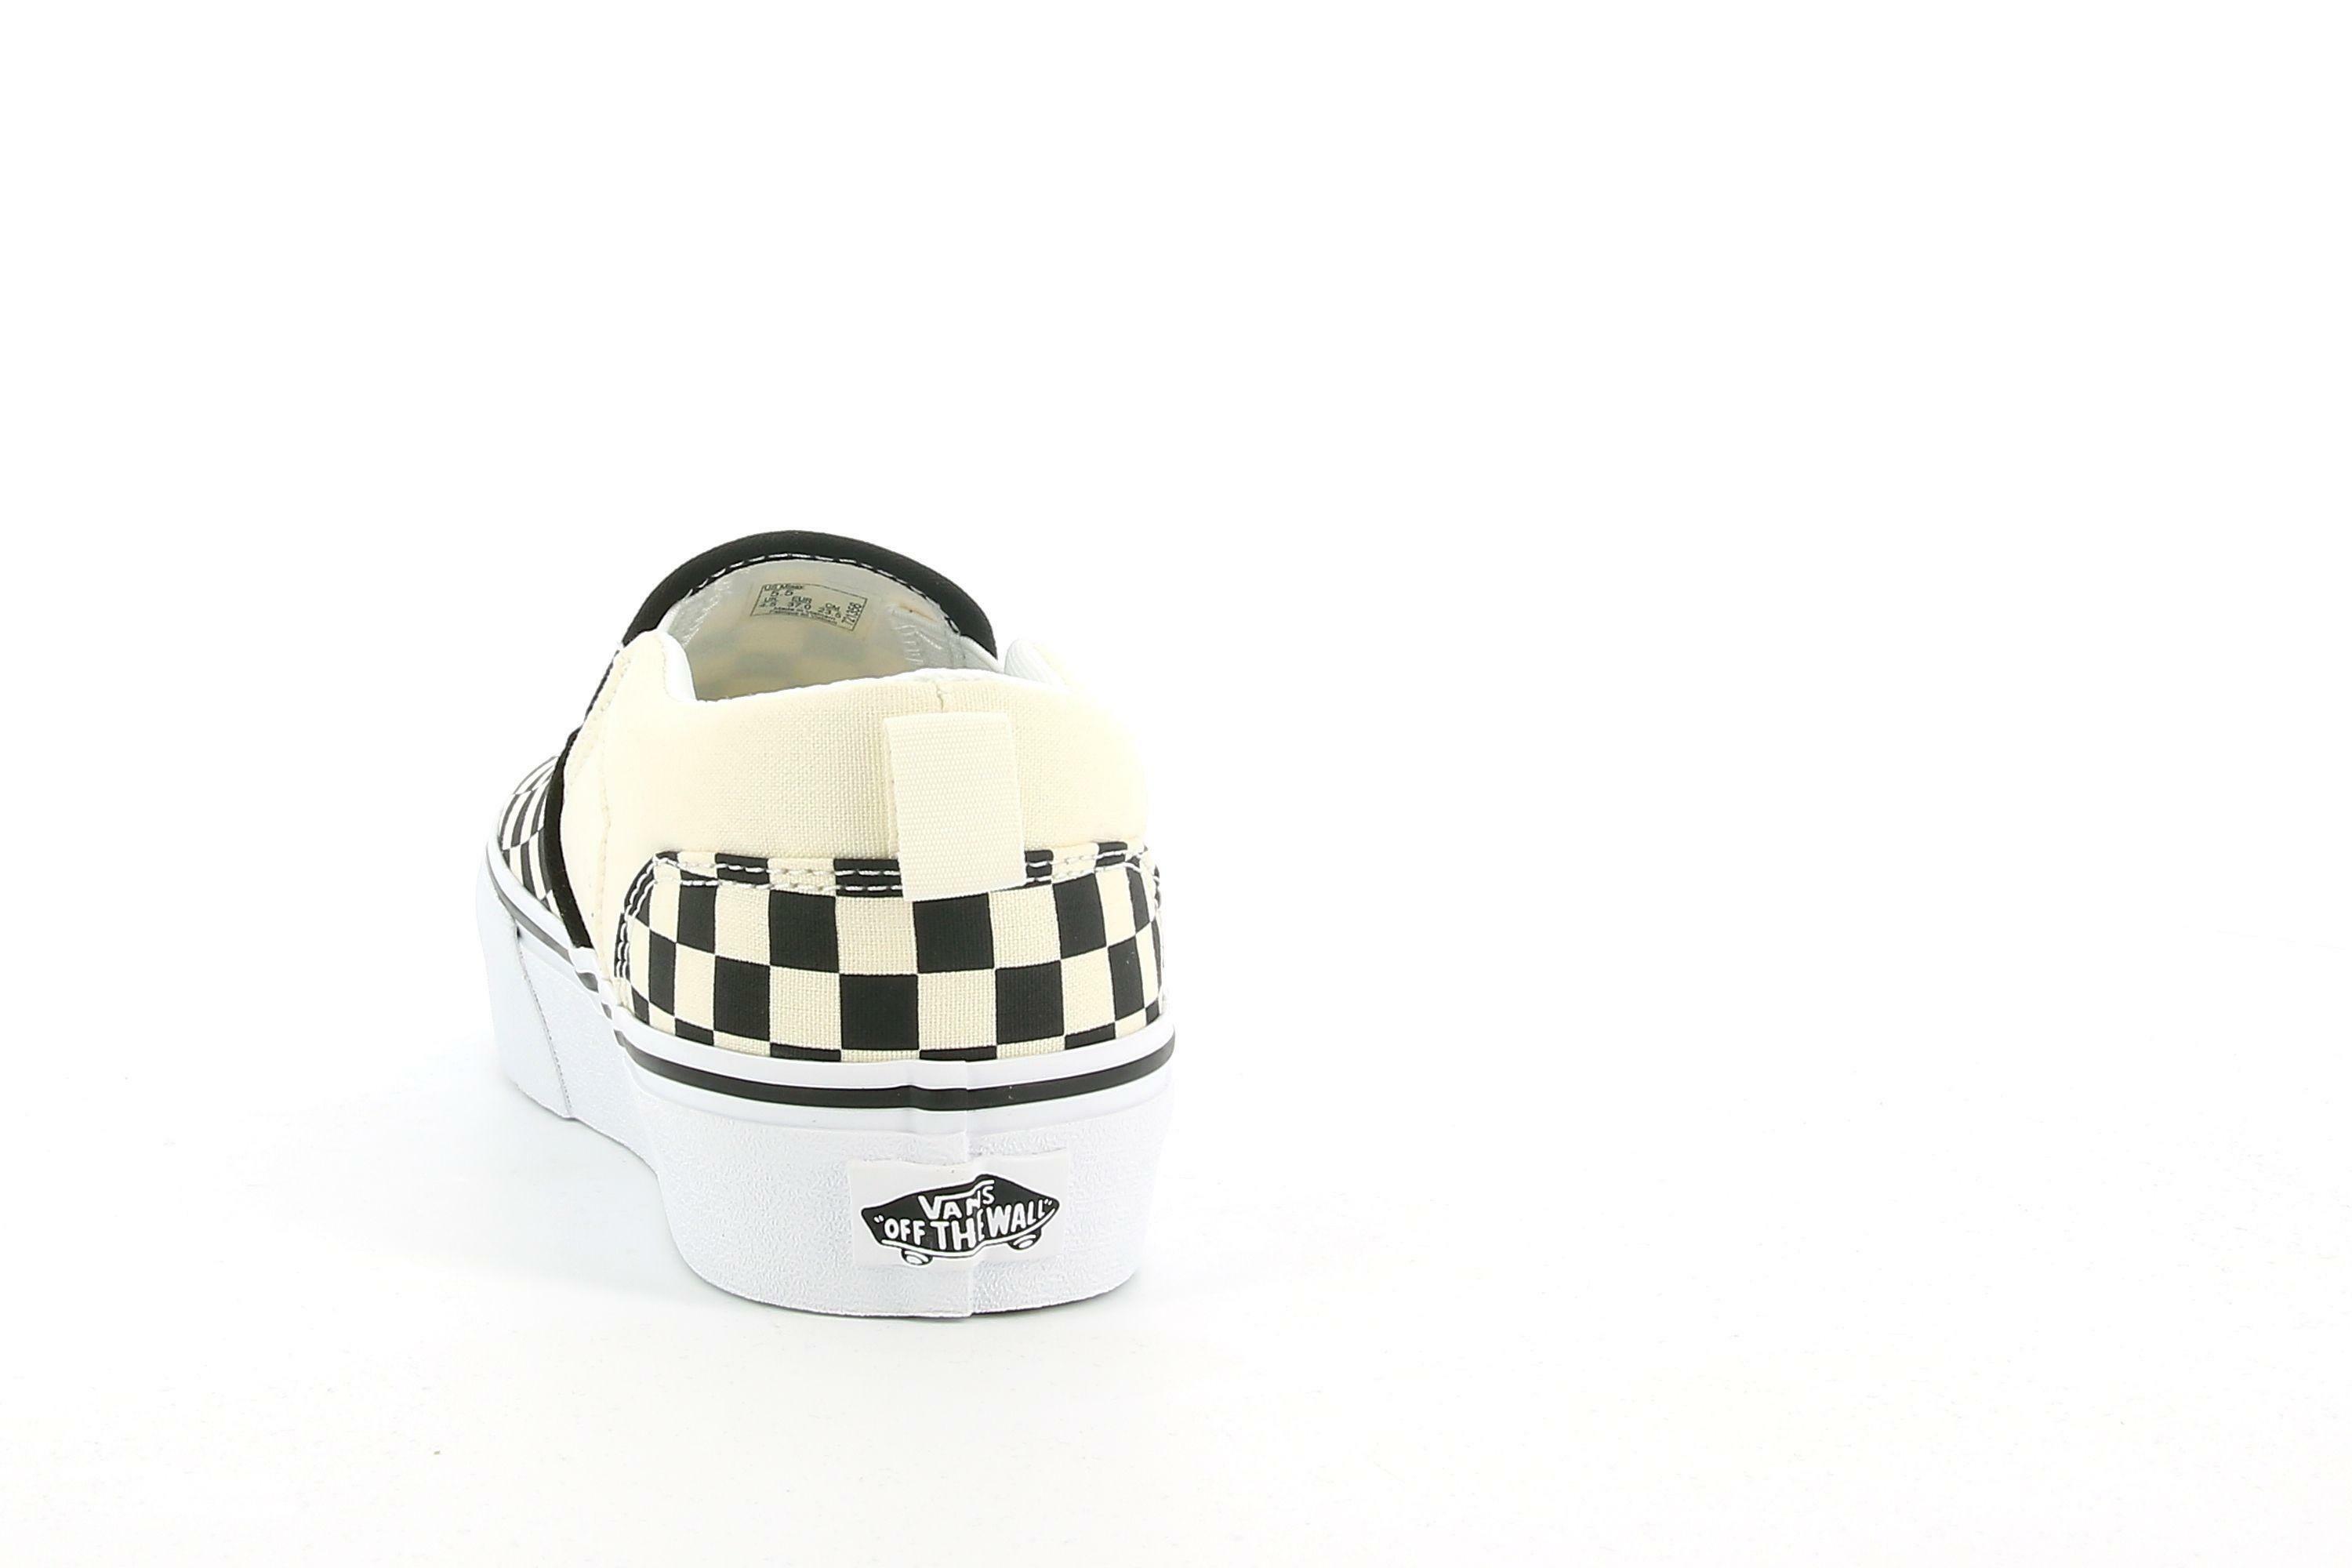 vans sneakers vans my asher yt checkerboard slip on vn0a4uvt5gx1. unisex, colore bianco